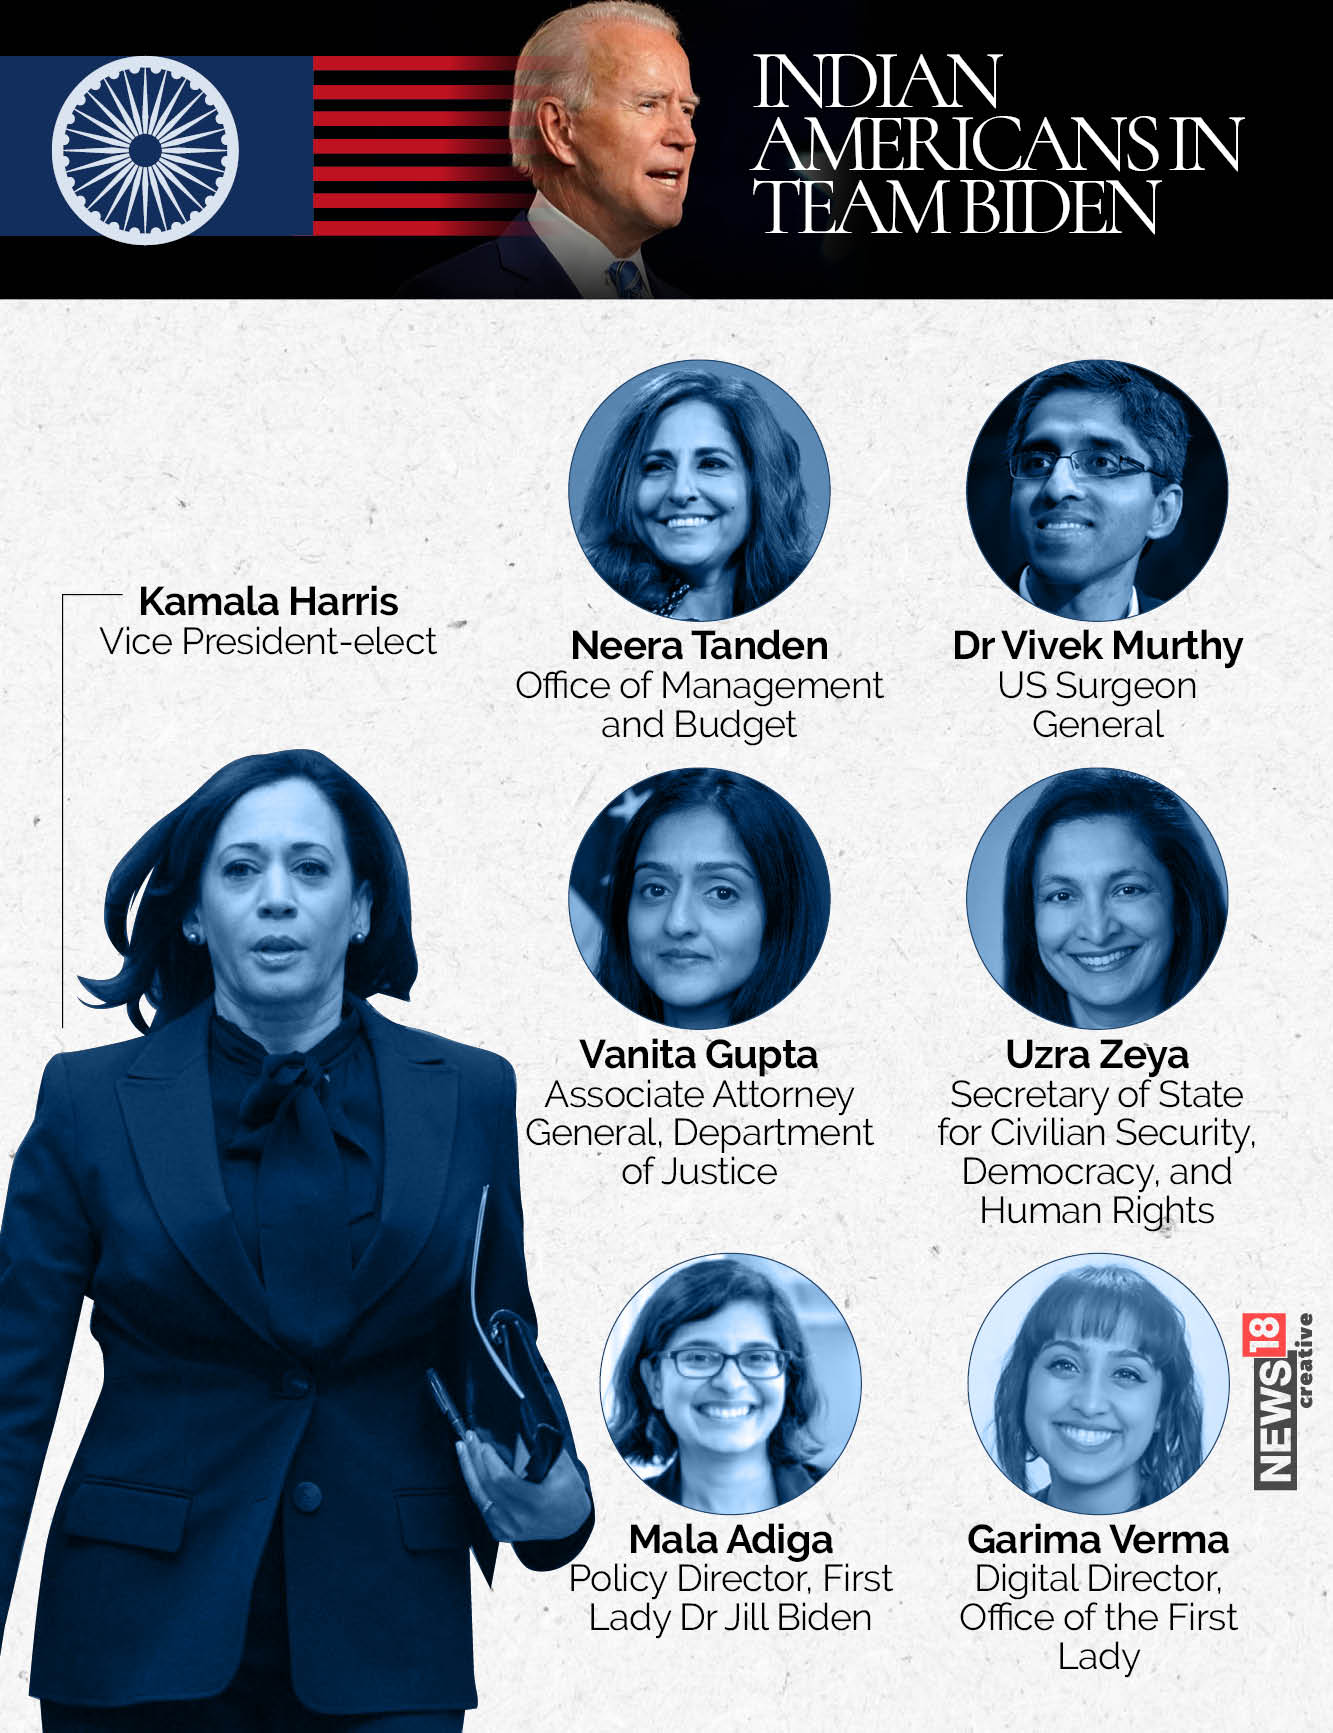 News By Numbers: 20 Indian Americans to join Joe Biden administration